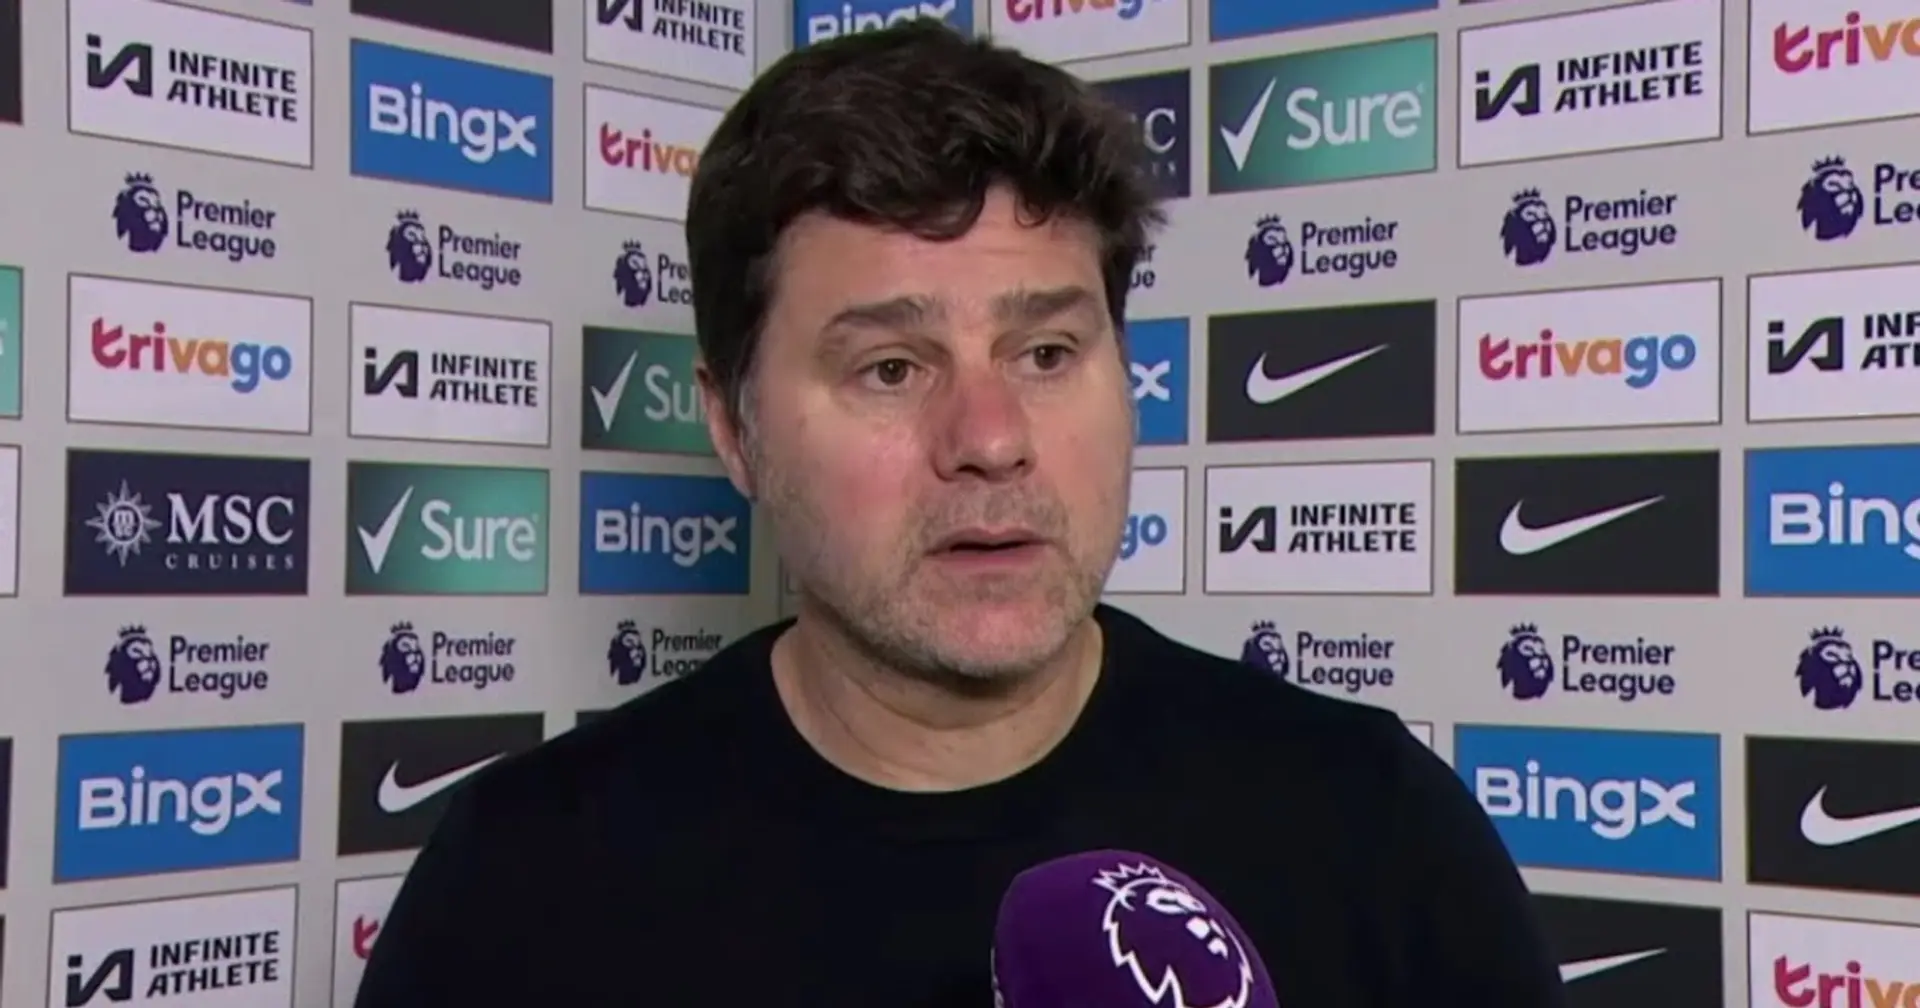 Pochettino: 'At 52 years old, you identify really quick whether the team is ready to compete'